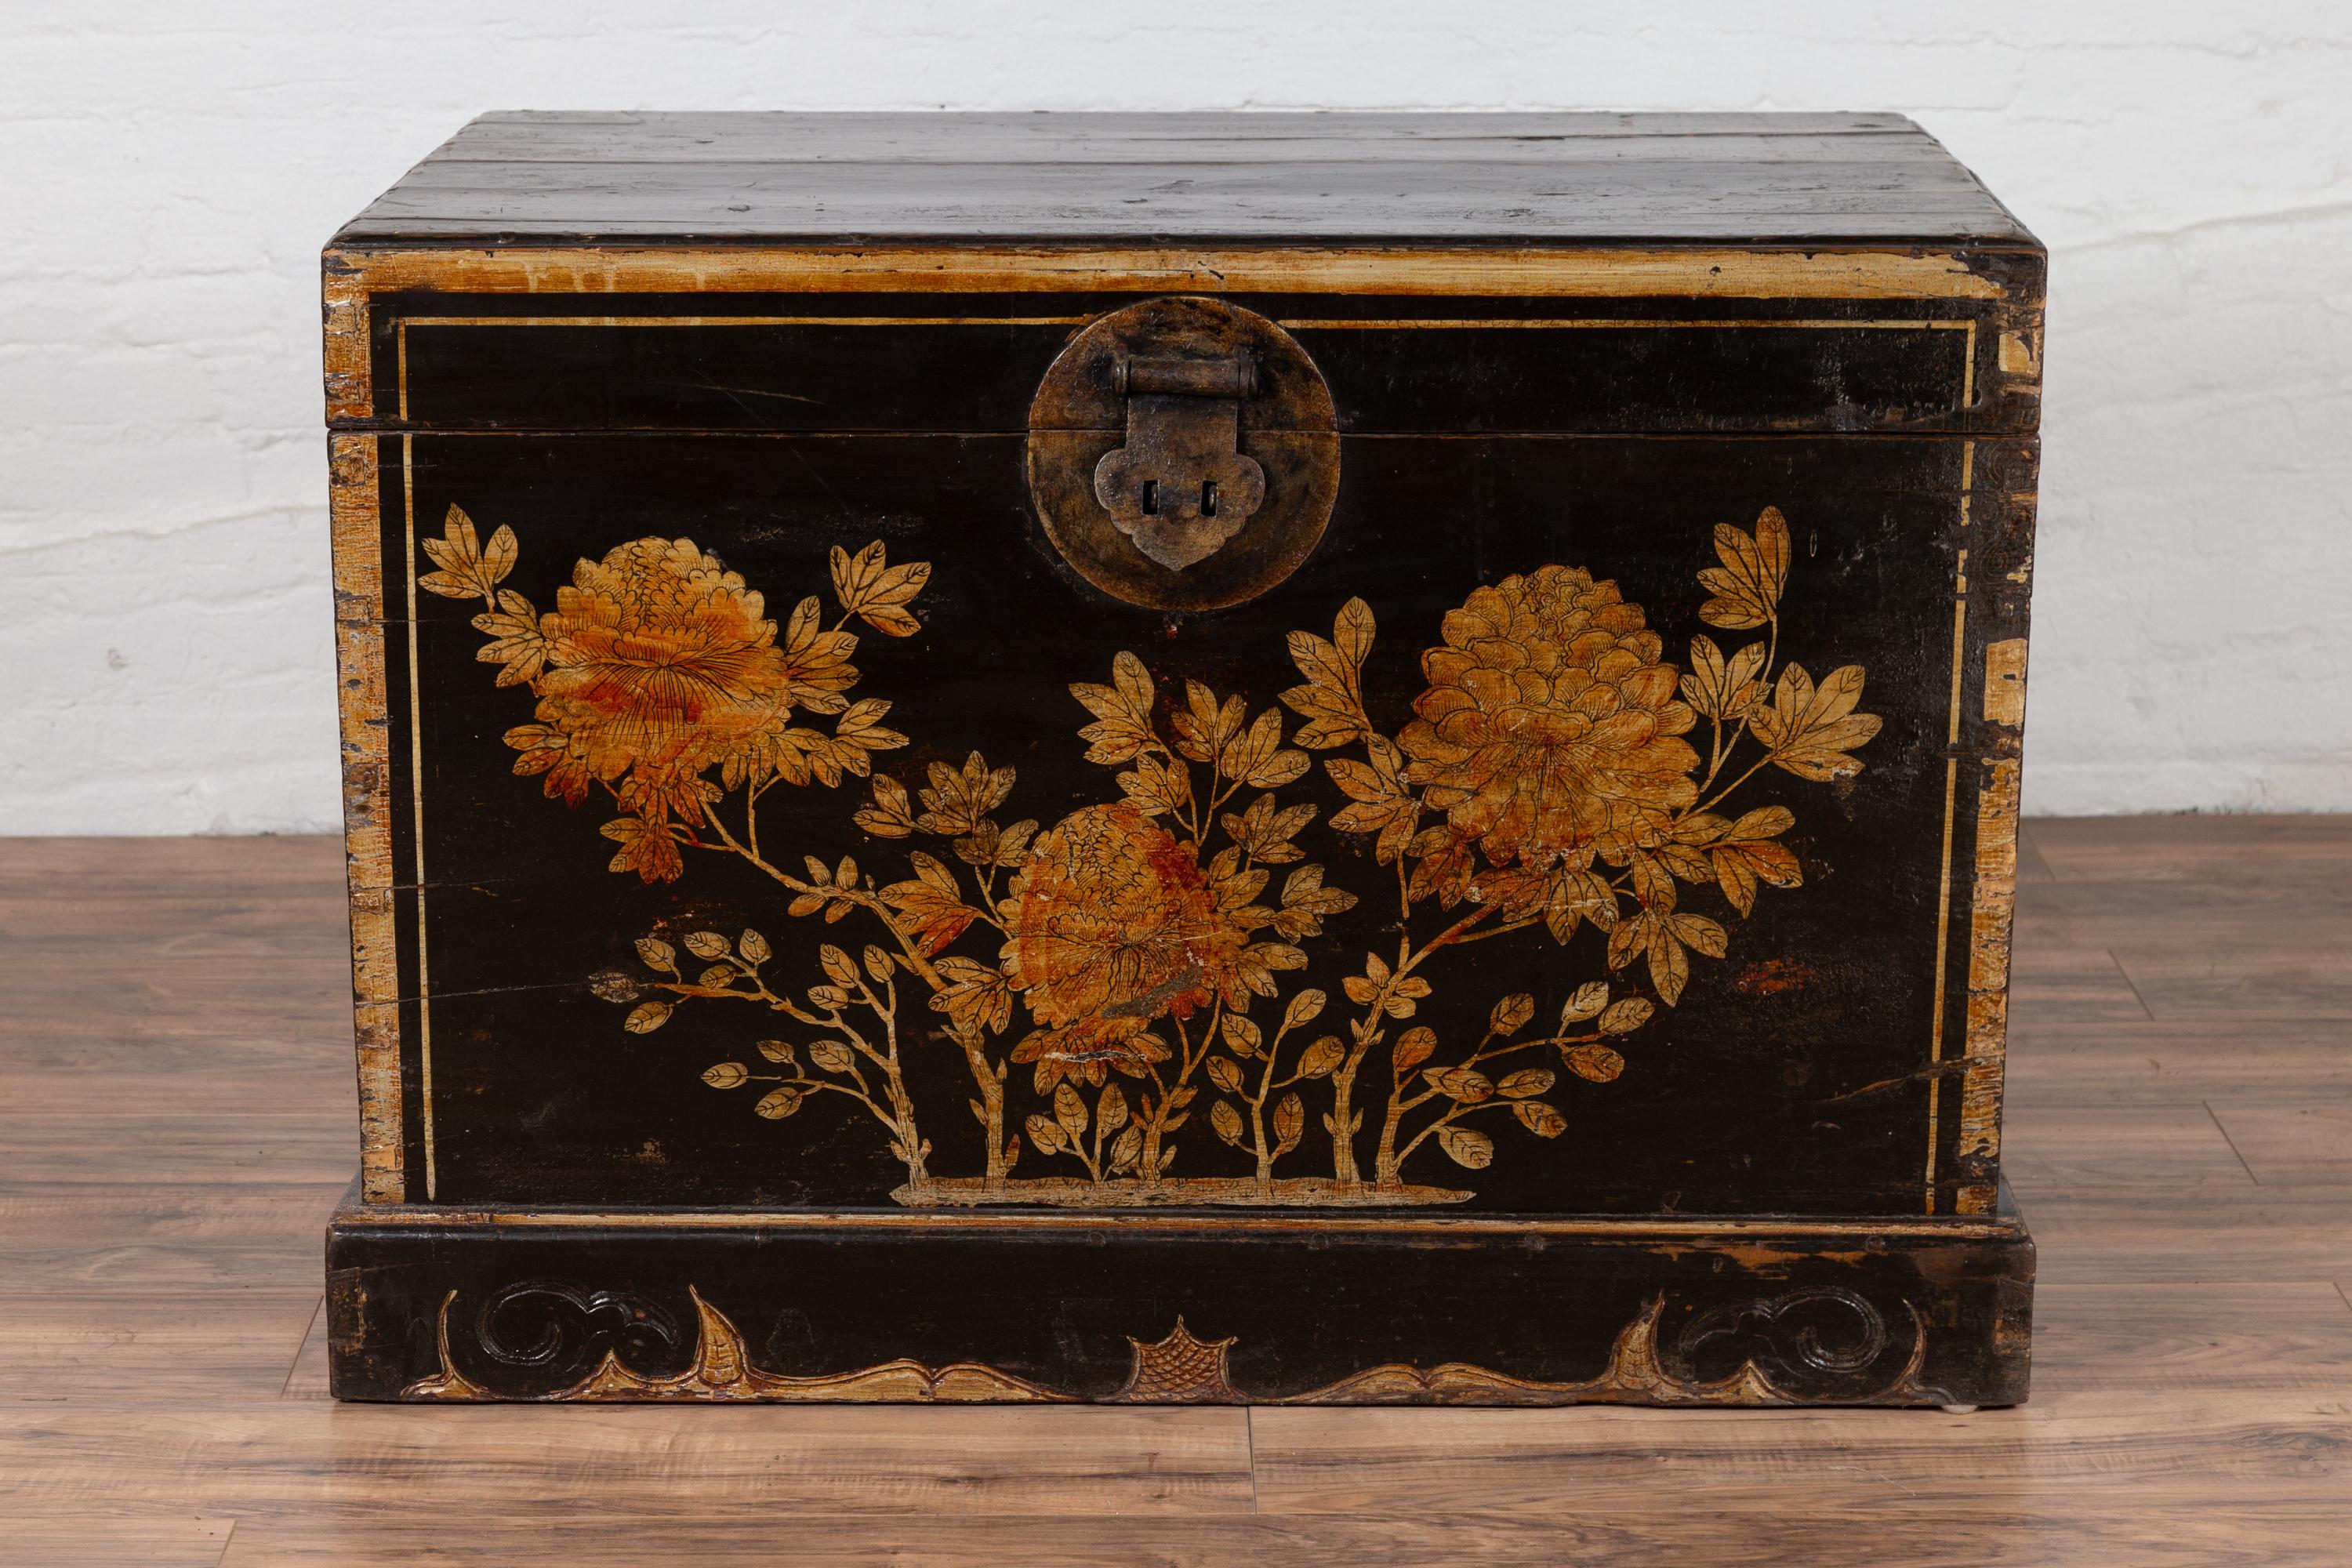 An antique Chinese black lacquered trunk from the early 20th century, with golden floral décor. Born in China during the early years of the 20th century, this Chinese trunk will be a tremendous decorative item in any room. Presenting a black